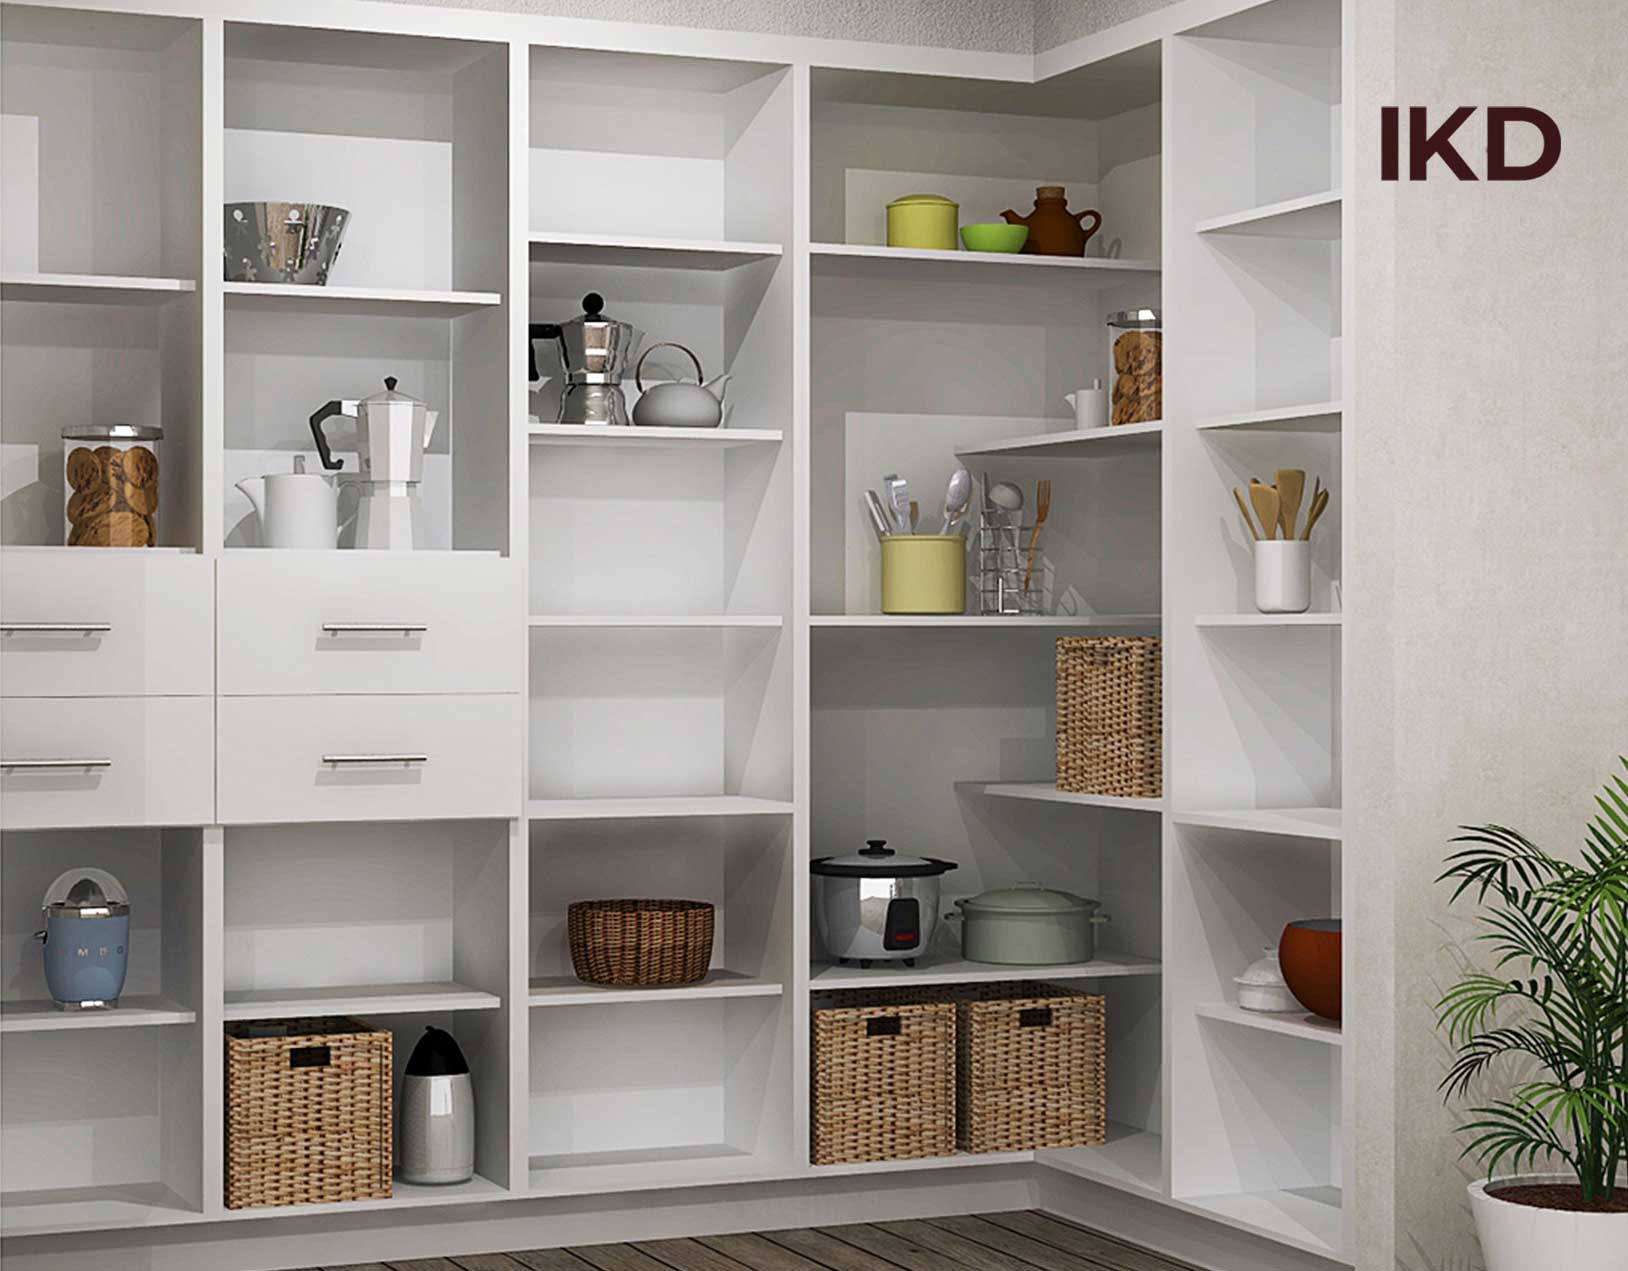 UTRUSTA laminate shelves for IKEA pantry designs offers durability and versatility, creating an enjoyable and useful space